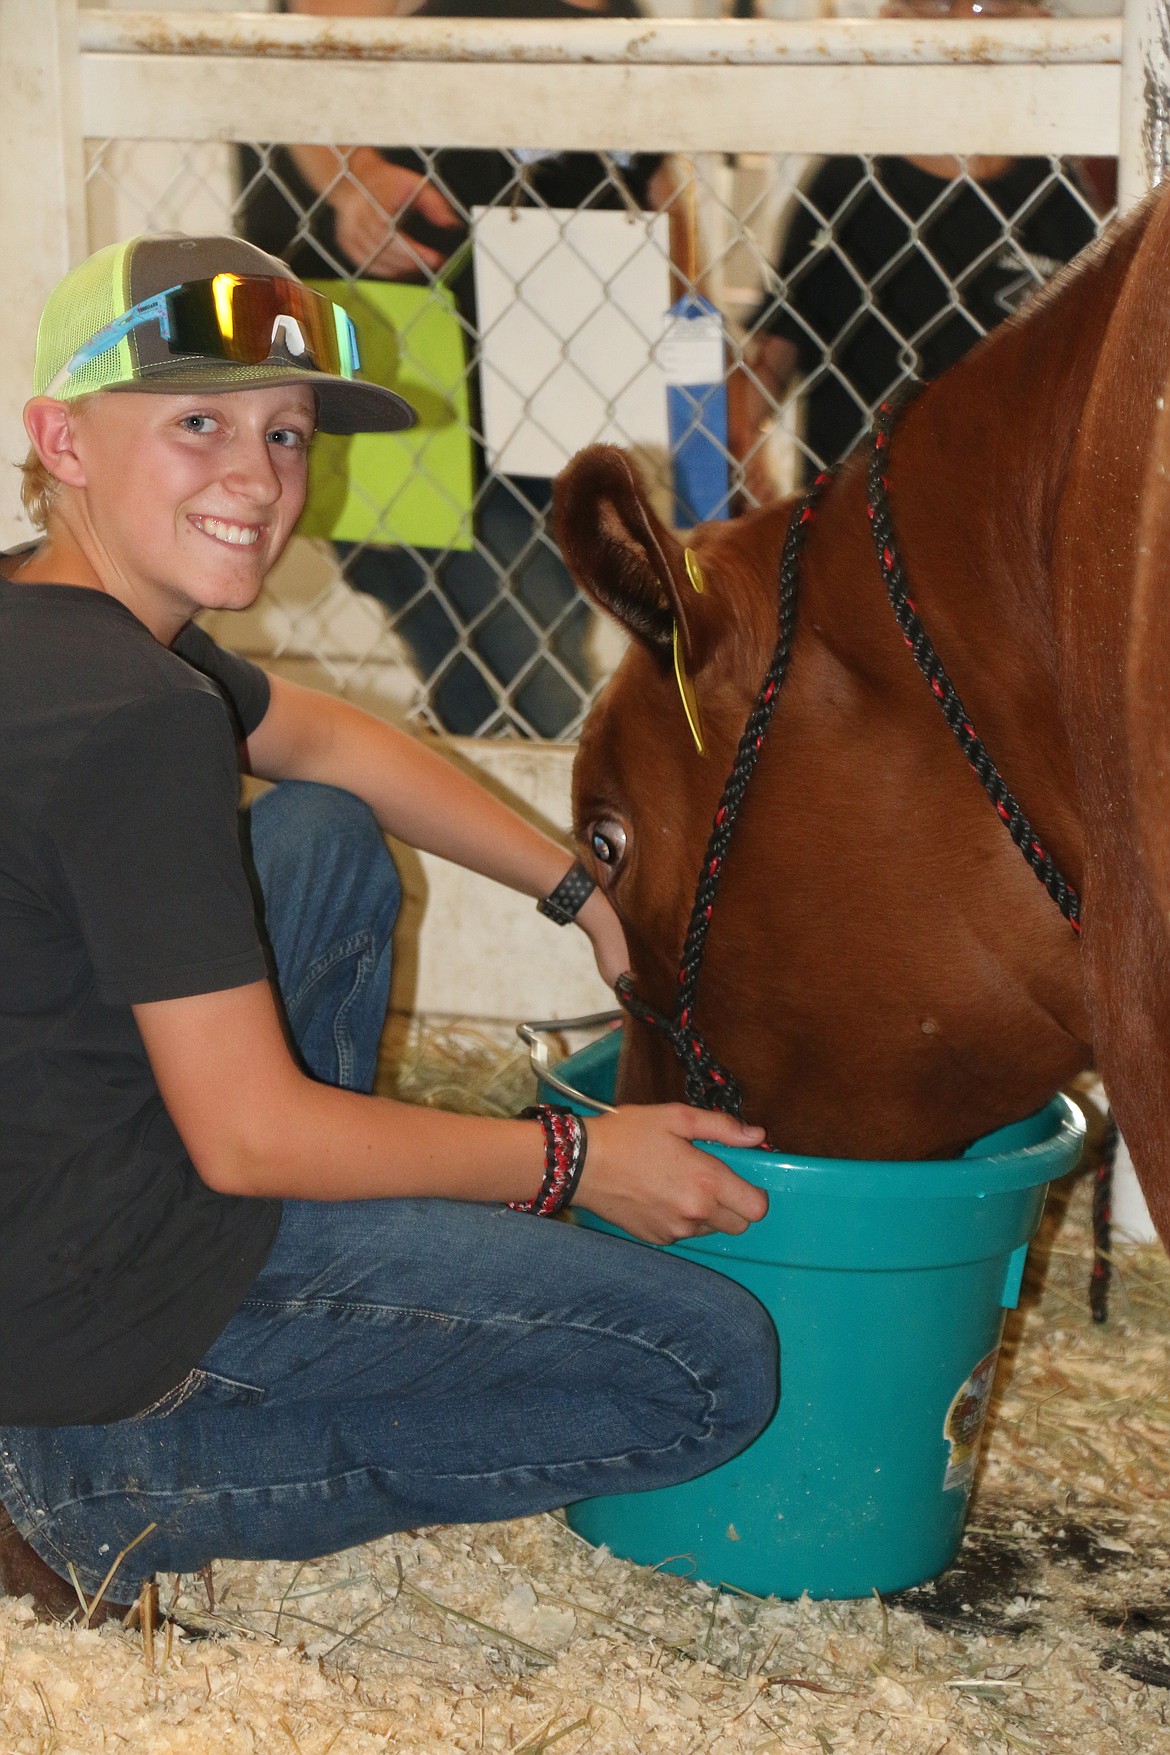 Tyler Wood, a member of the Gold 'n' Grouse 4-H Club, tends to his market animal steer at the Bonner County Fairgrounds on Wednesday,